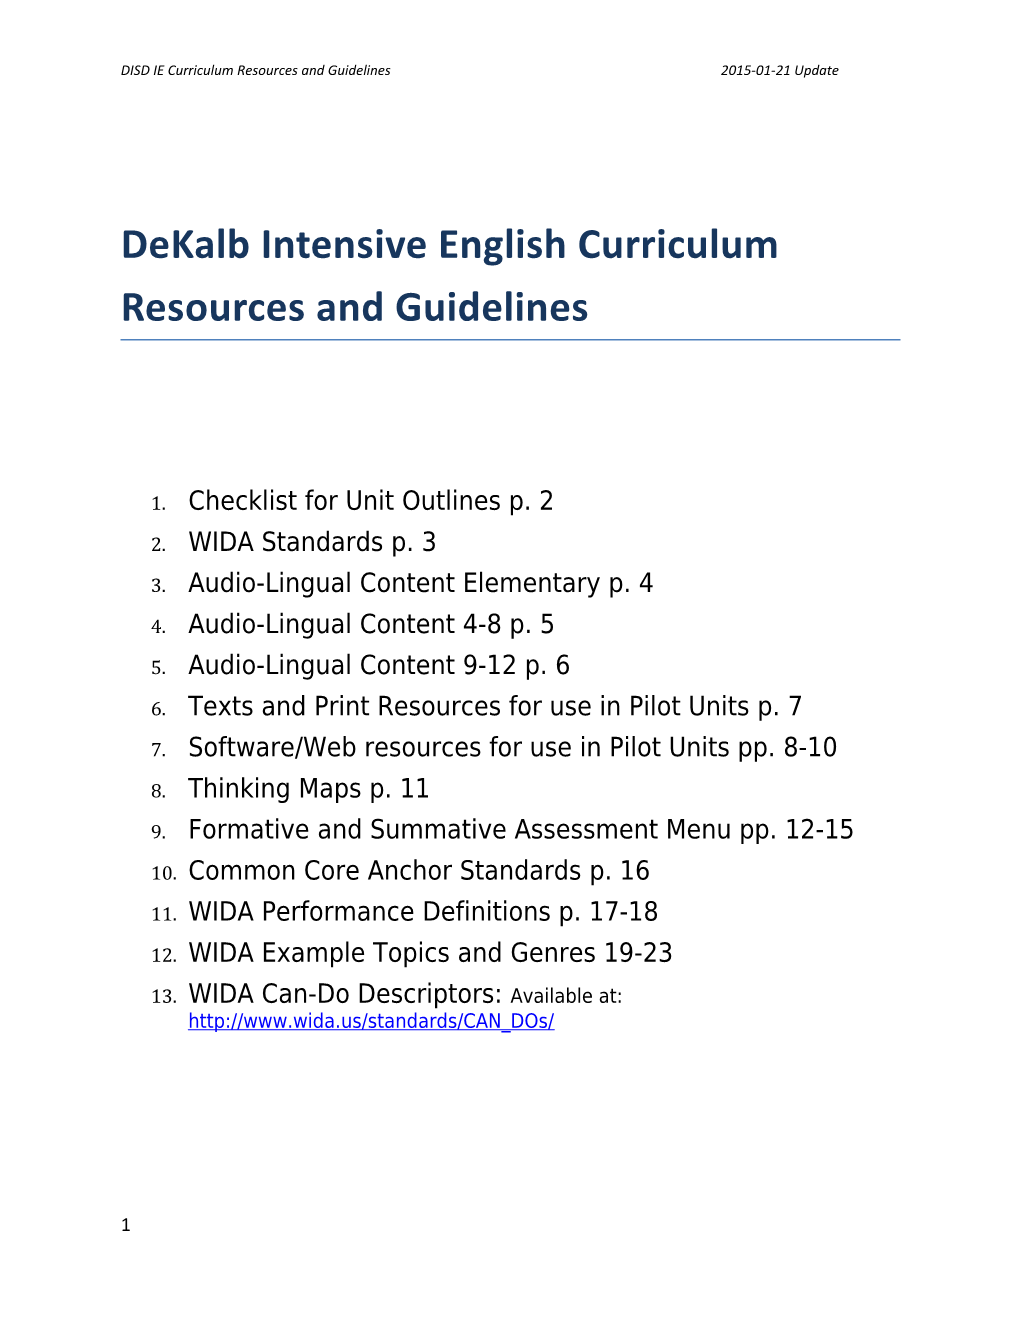 DISD IE Curriculum Resources and Guidelines 2015-01-21 Update